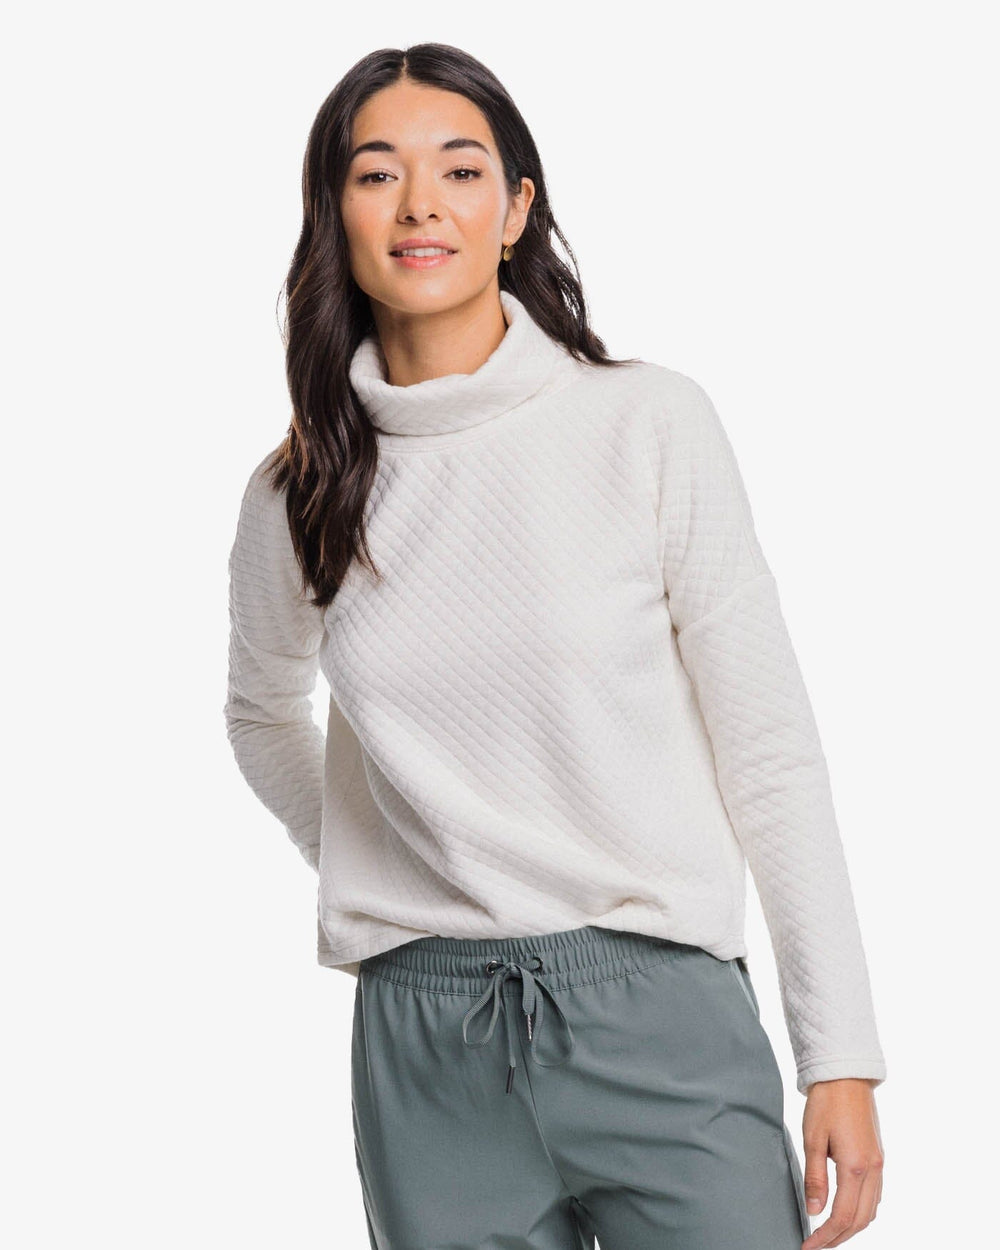 The front view of the Southern Tide Mellie MockNeck Sweatshirt by Southern Tide - Marshmallow